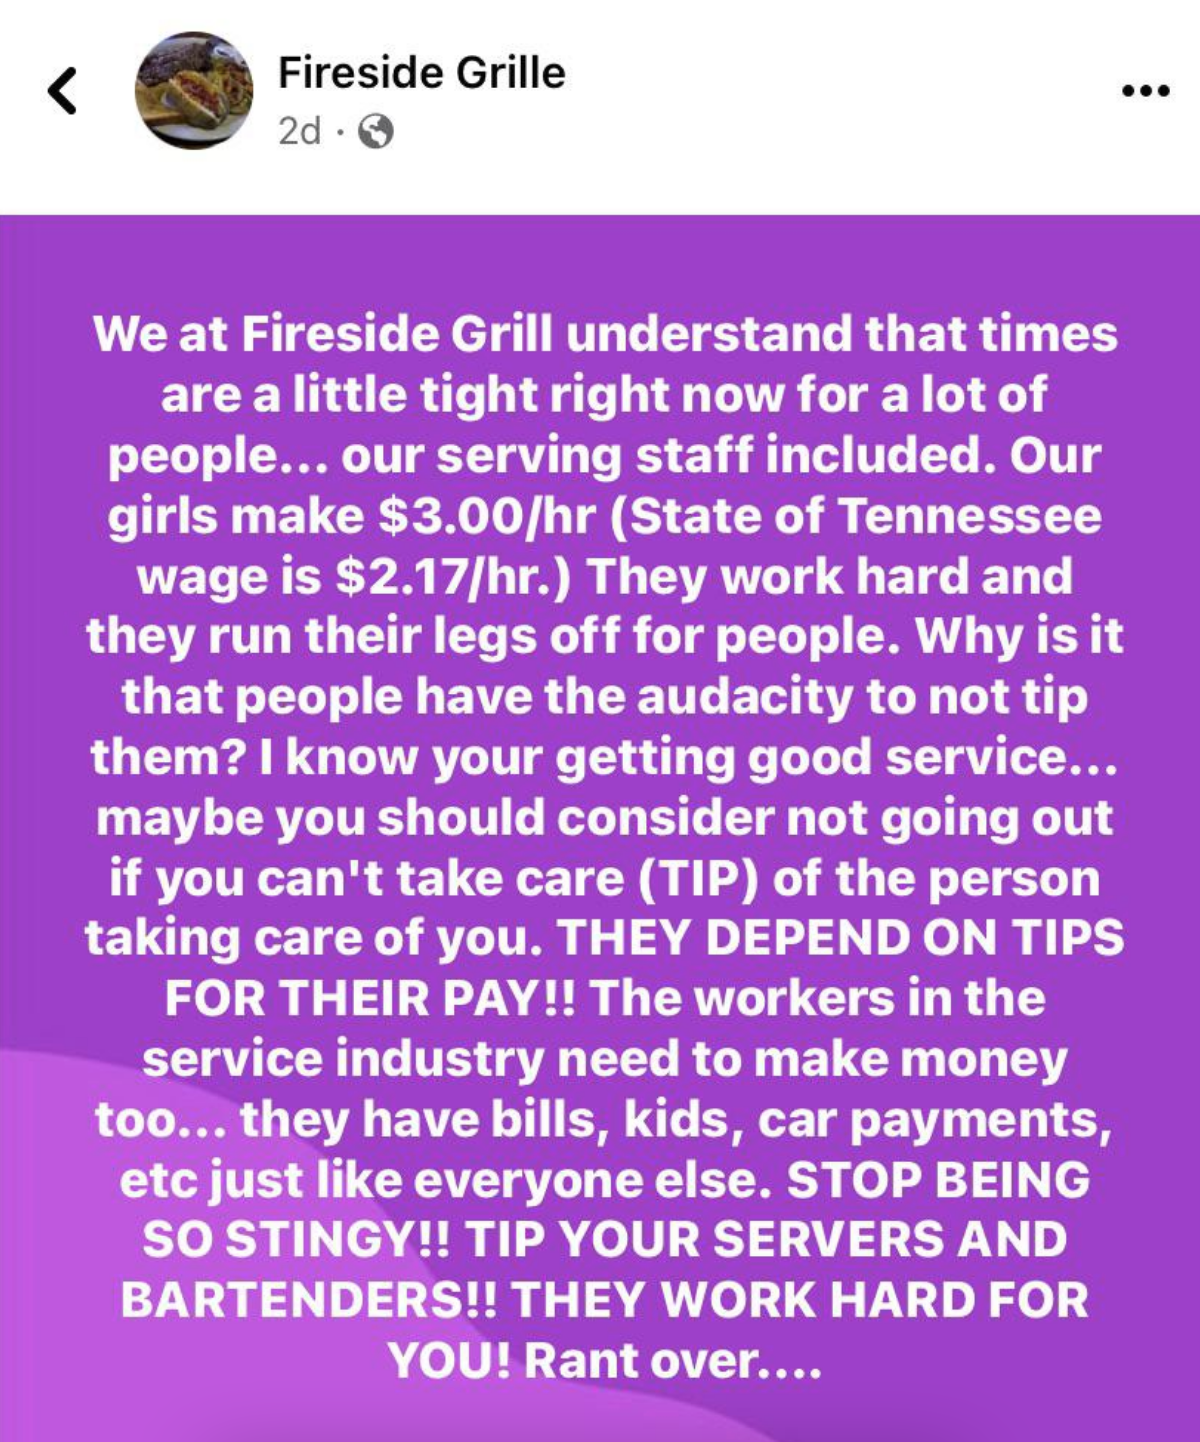 Fireside Grille says they pay their &quot;girls&quot; (servers and bartenders) $3 an hour when Tennessee minimum wage is $2 and 17 cents an hour, &quot;they depend on tips for their pay,&quot; and scolds customers for being stingy